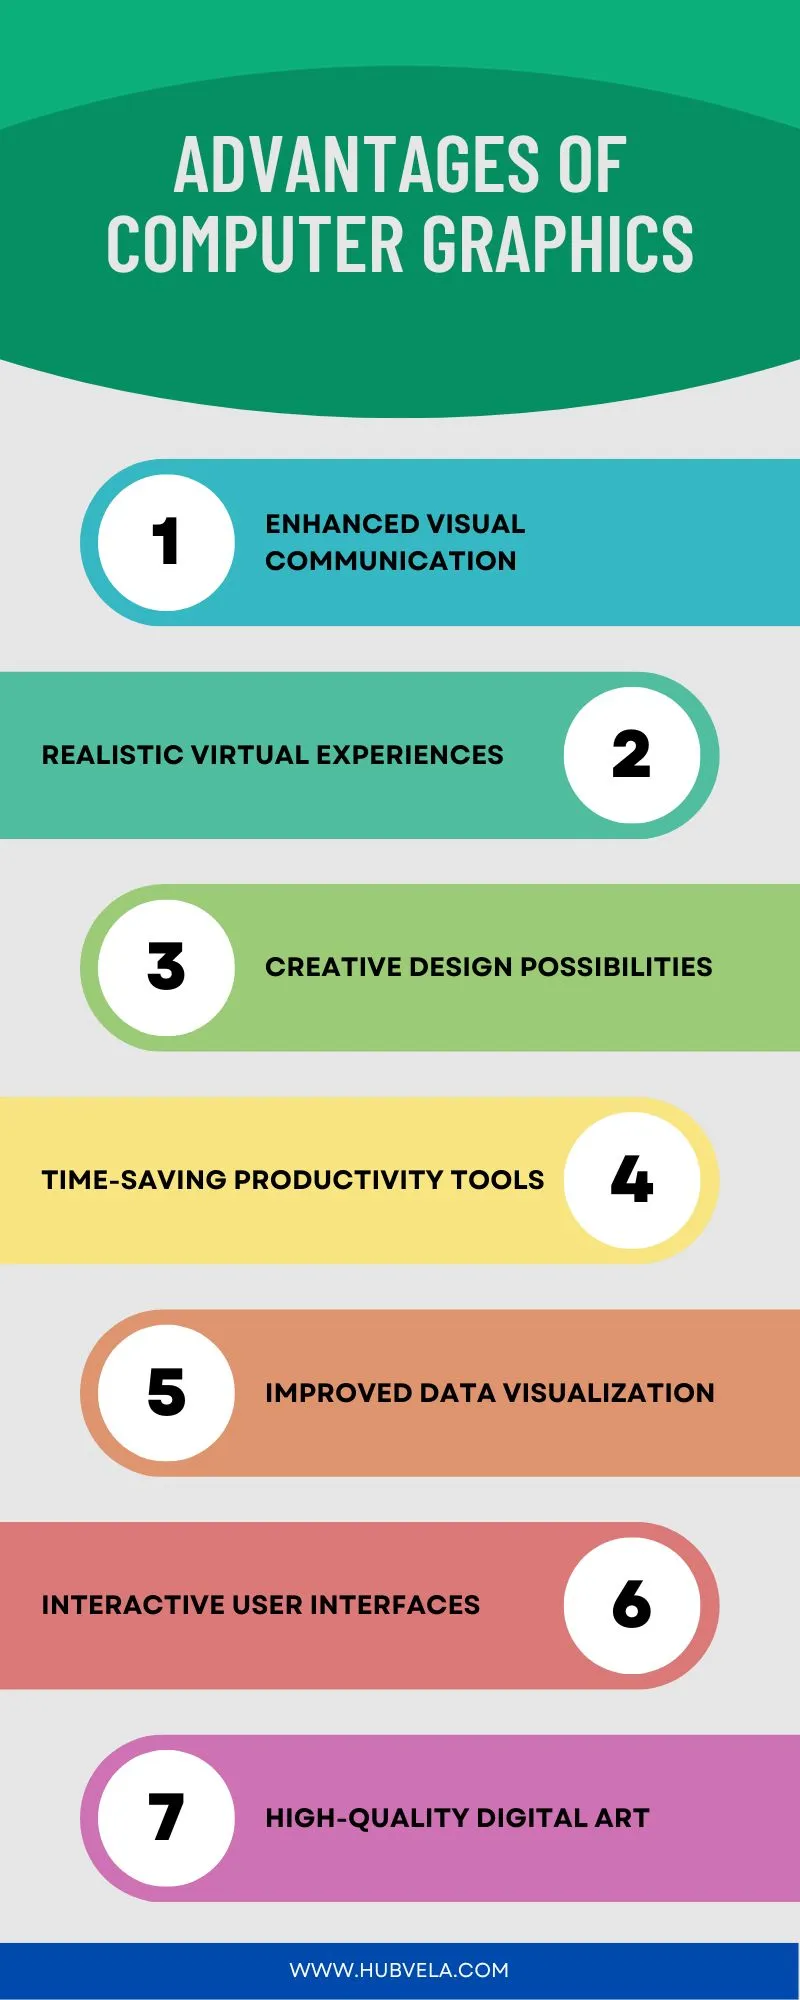 Advantages of Computer Graphics Infographic